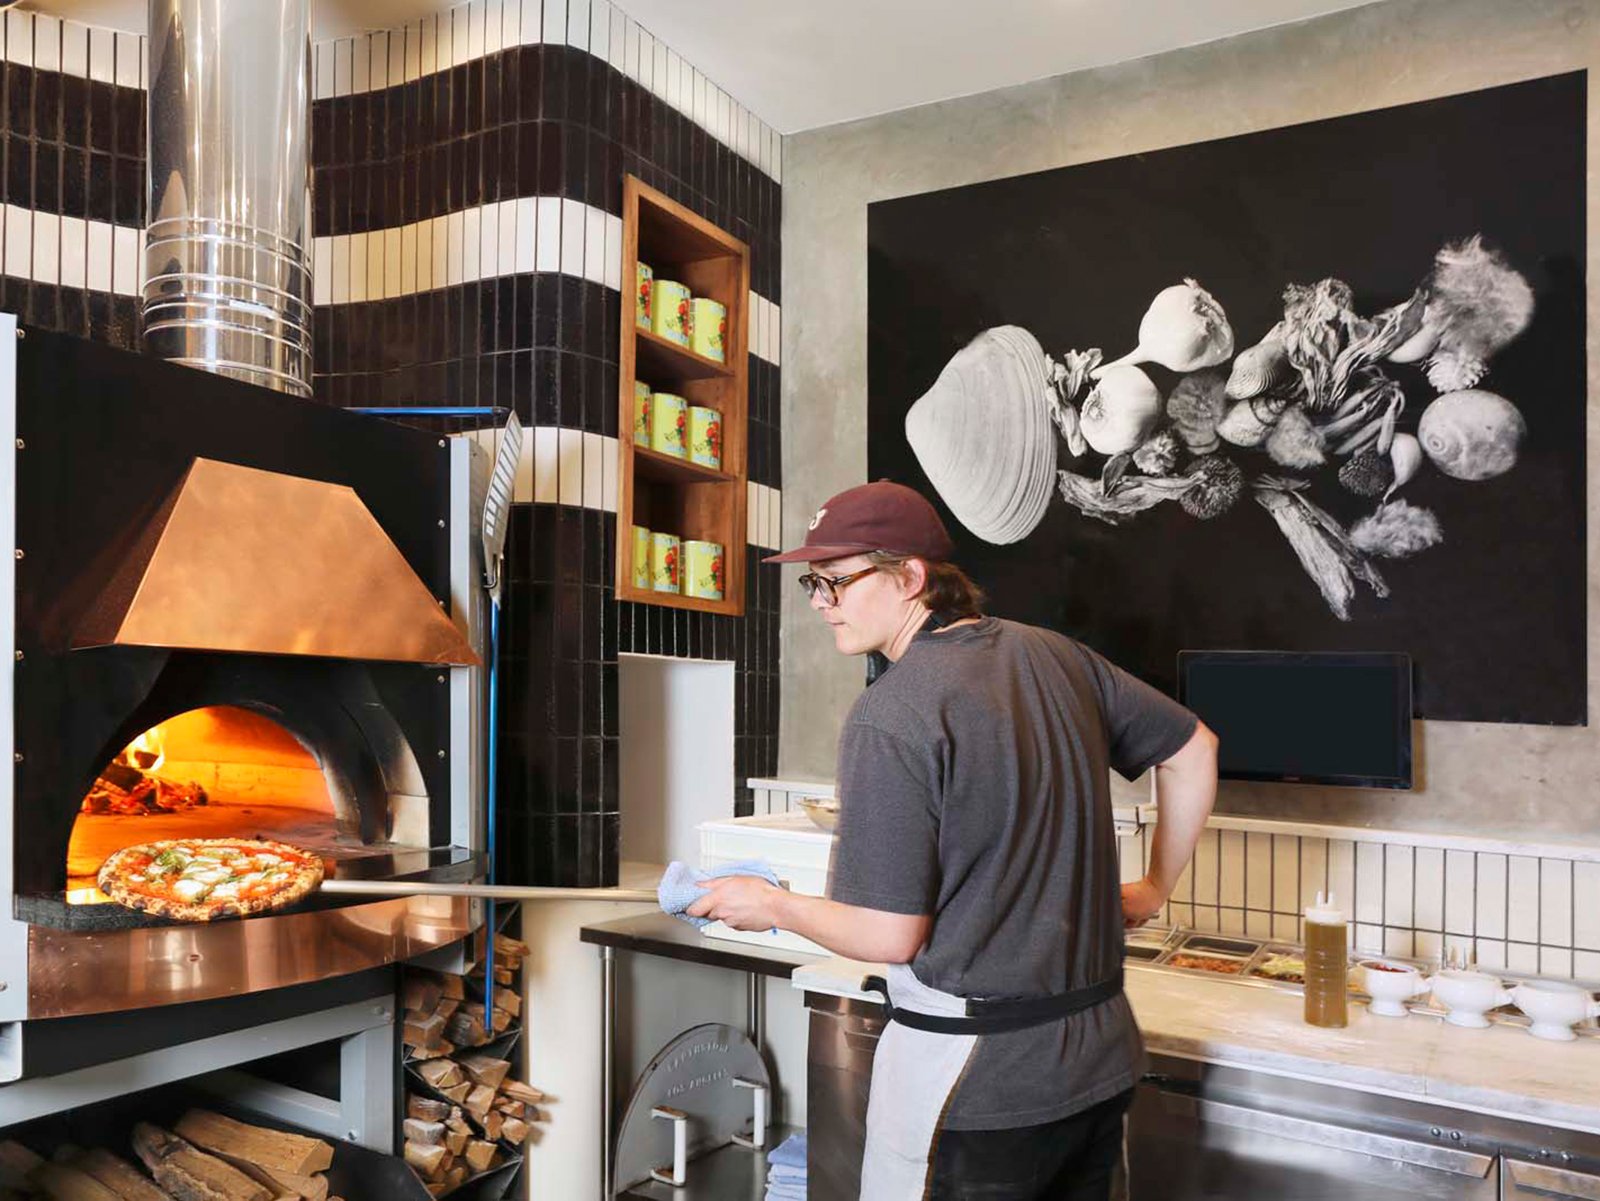 Team member removing pizza from wood-fired oven